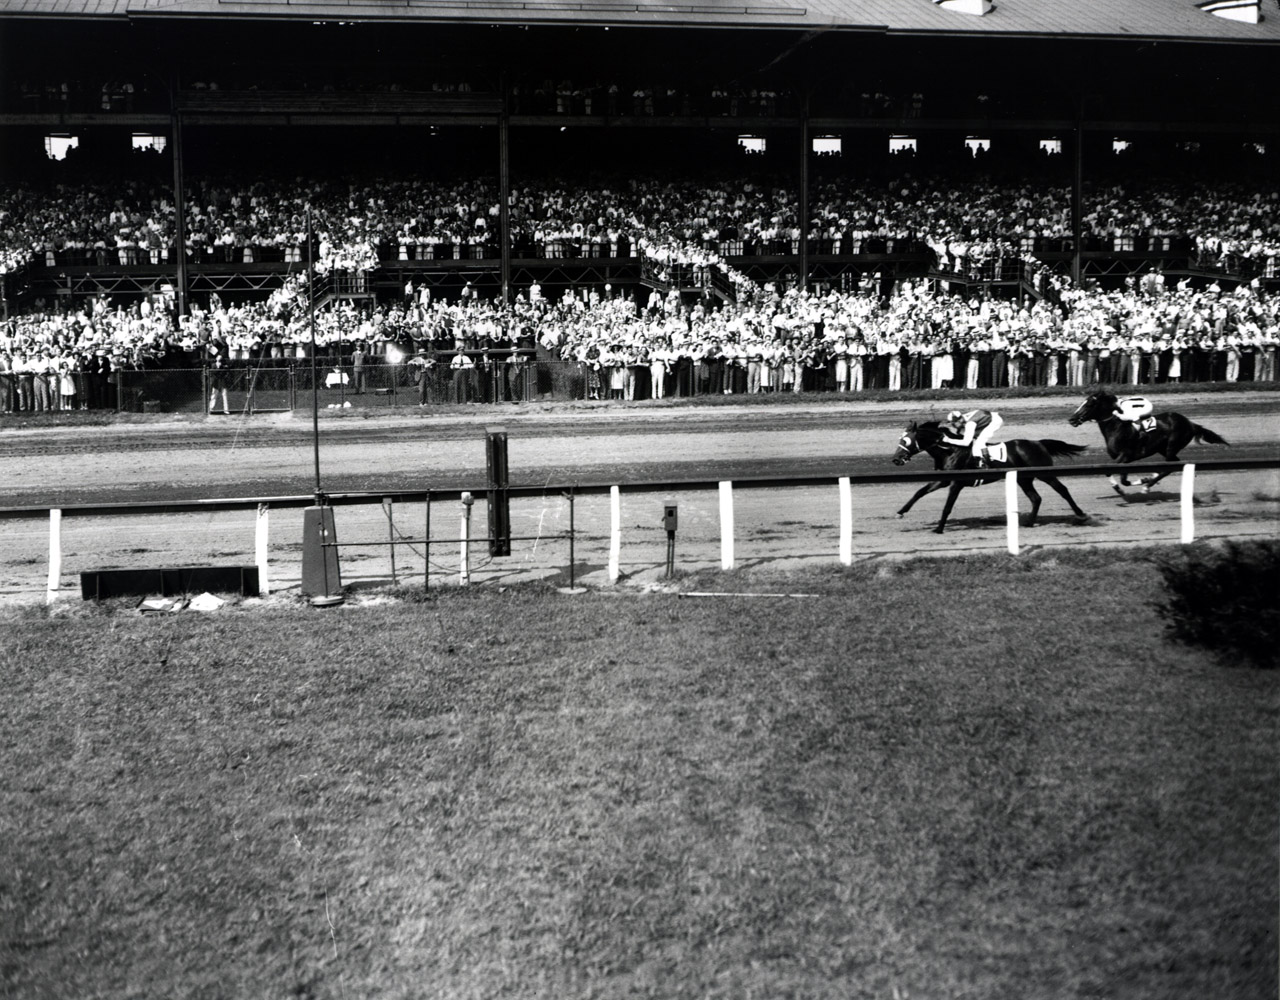 Seabiscuit (Red Pollard up) winning the 1937 Butler Handicap at Empire City (Museum Collection)